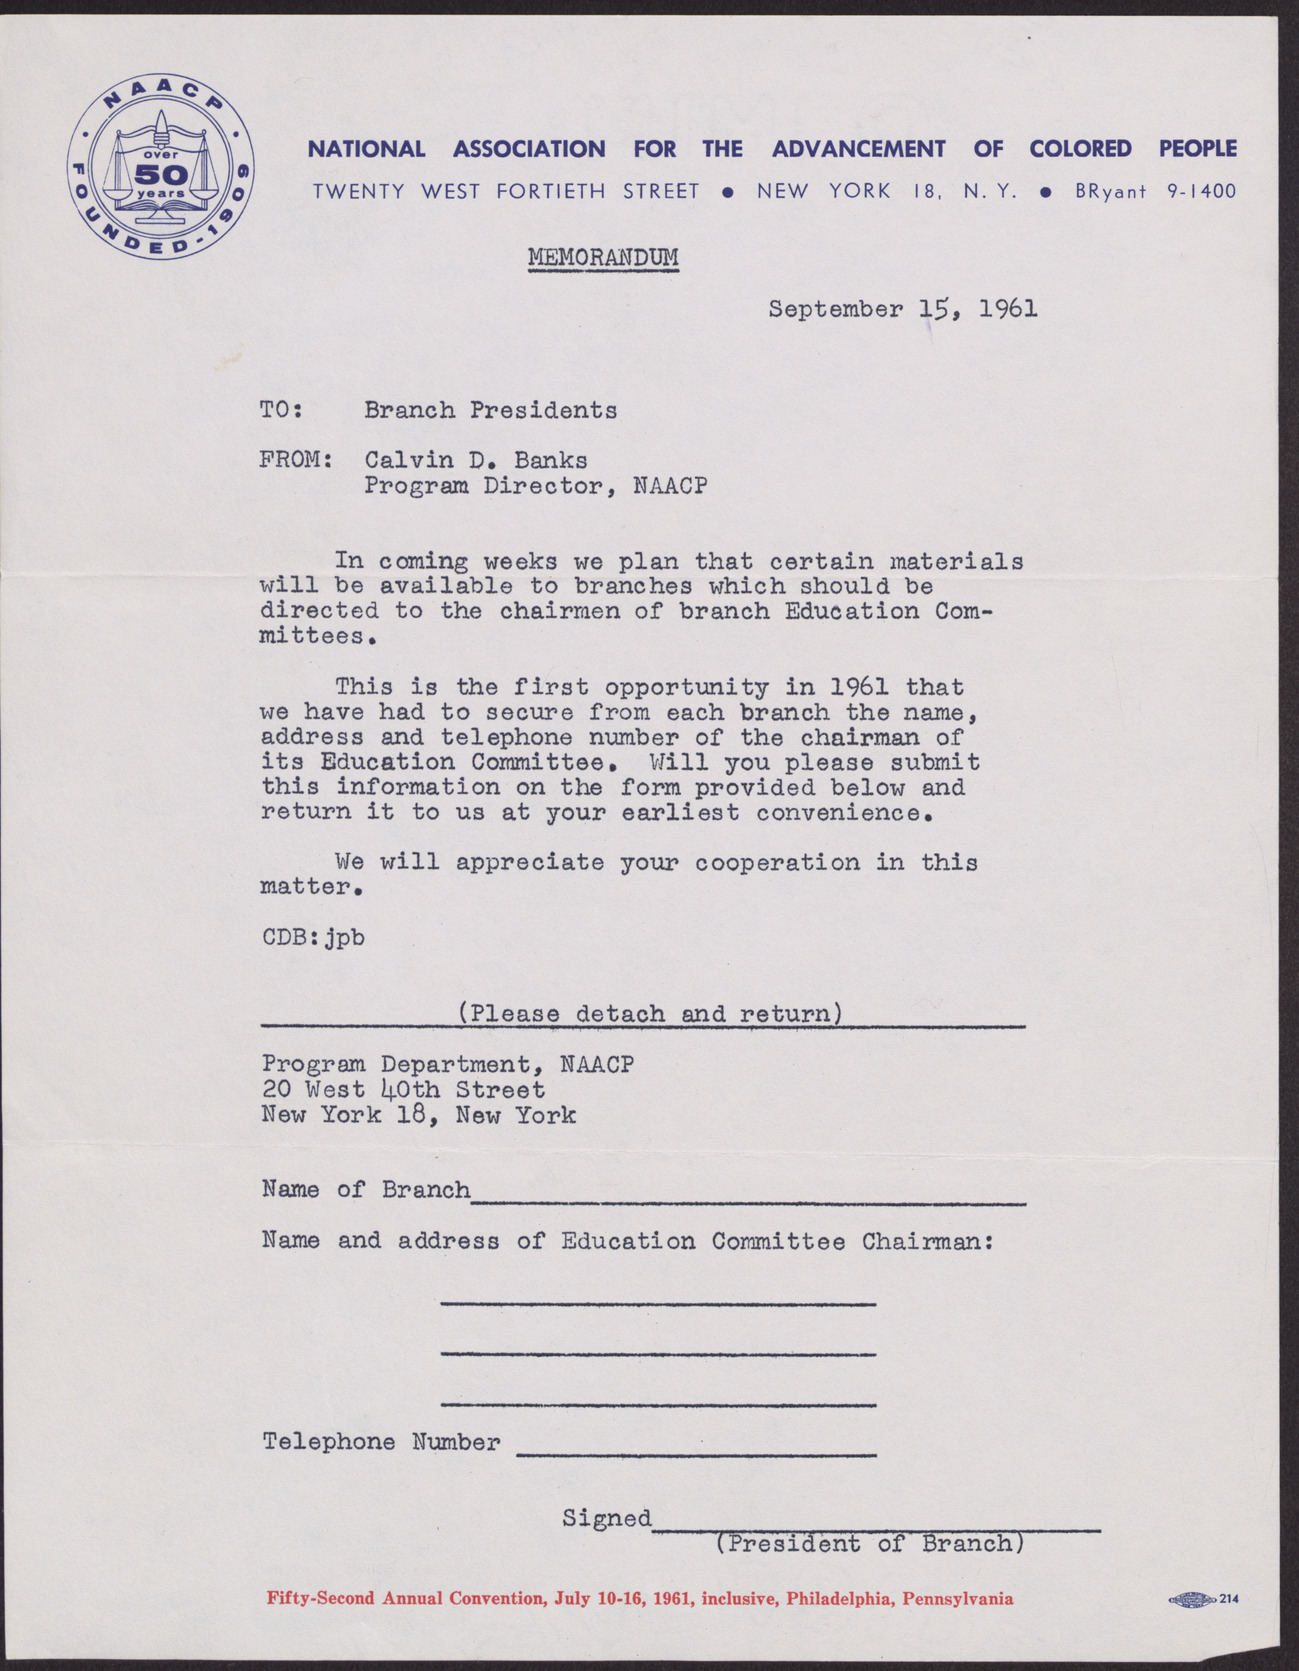 Letter to NAACP regional branch presidents from Calvin D. Banks, September 15, 1961